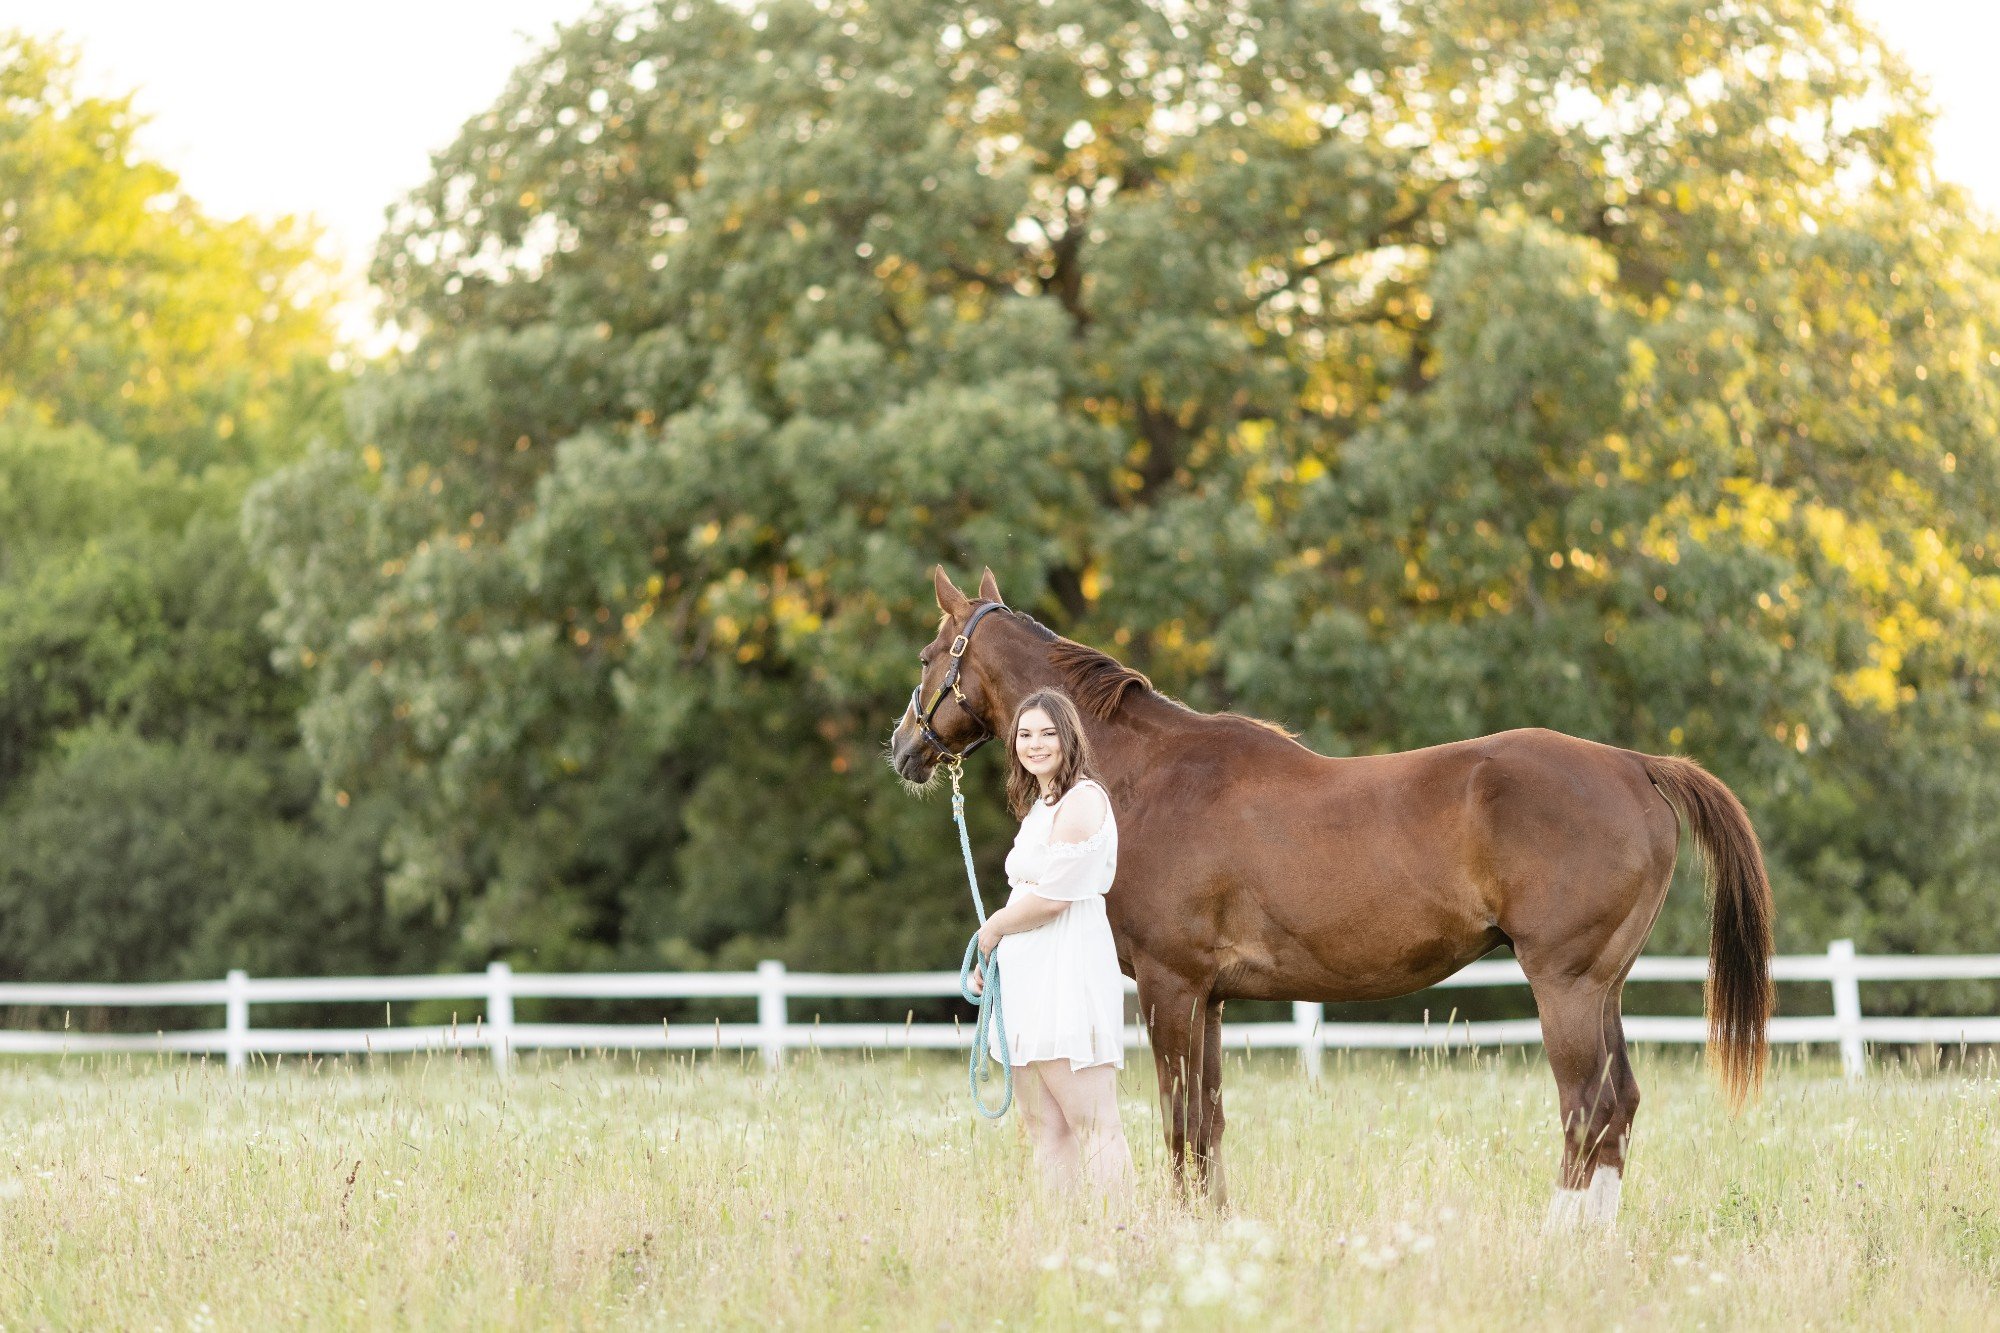 Senior Pictures with horses at Cedar Ridge Stables in Ripon, WI